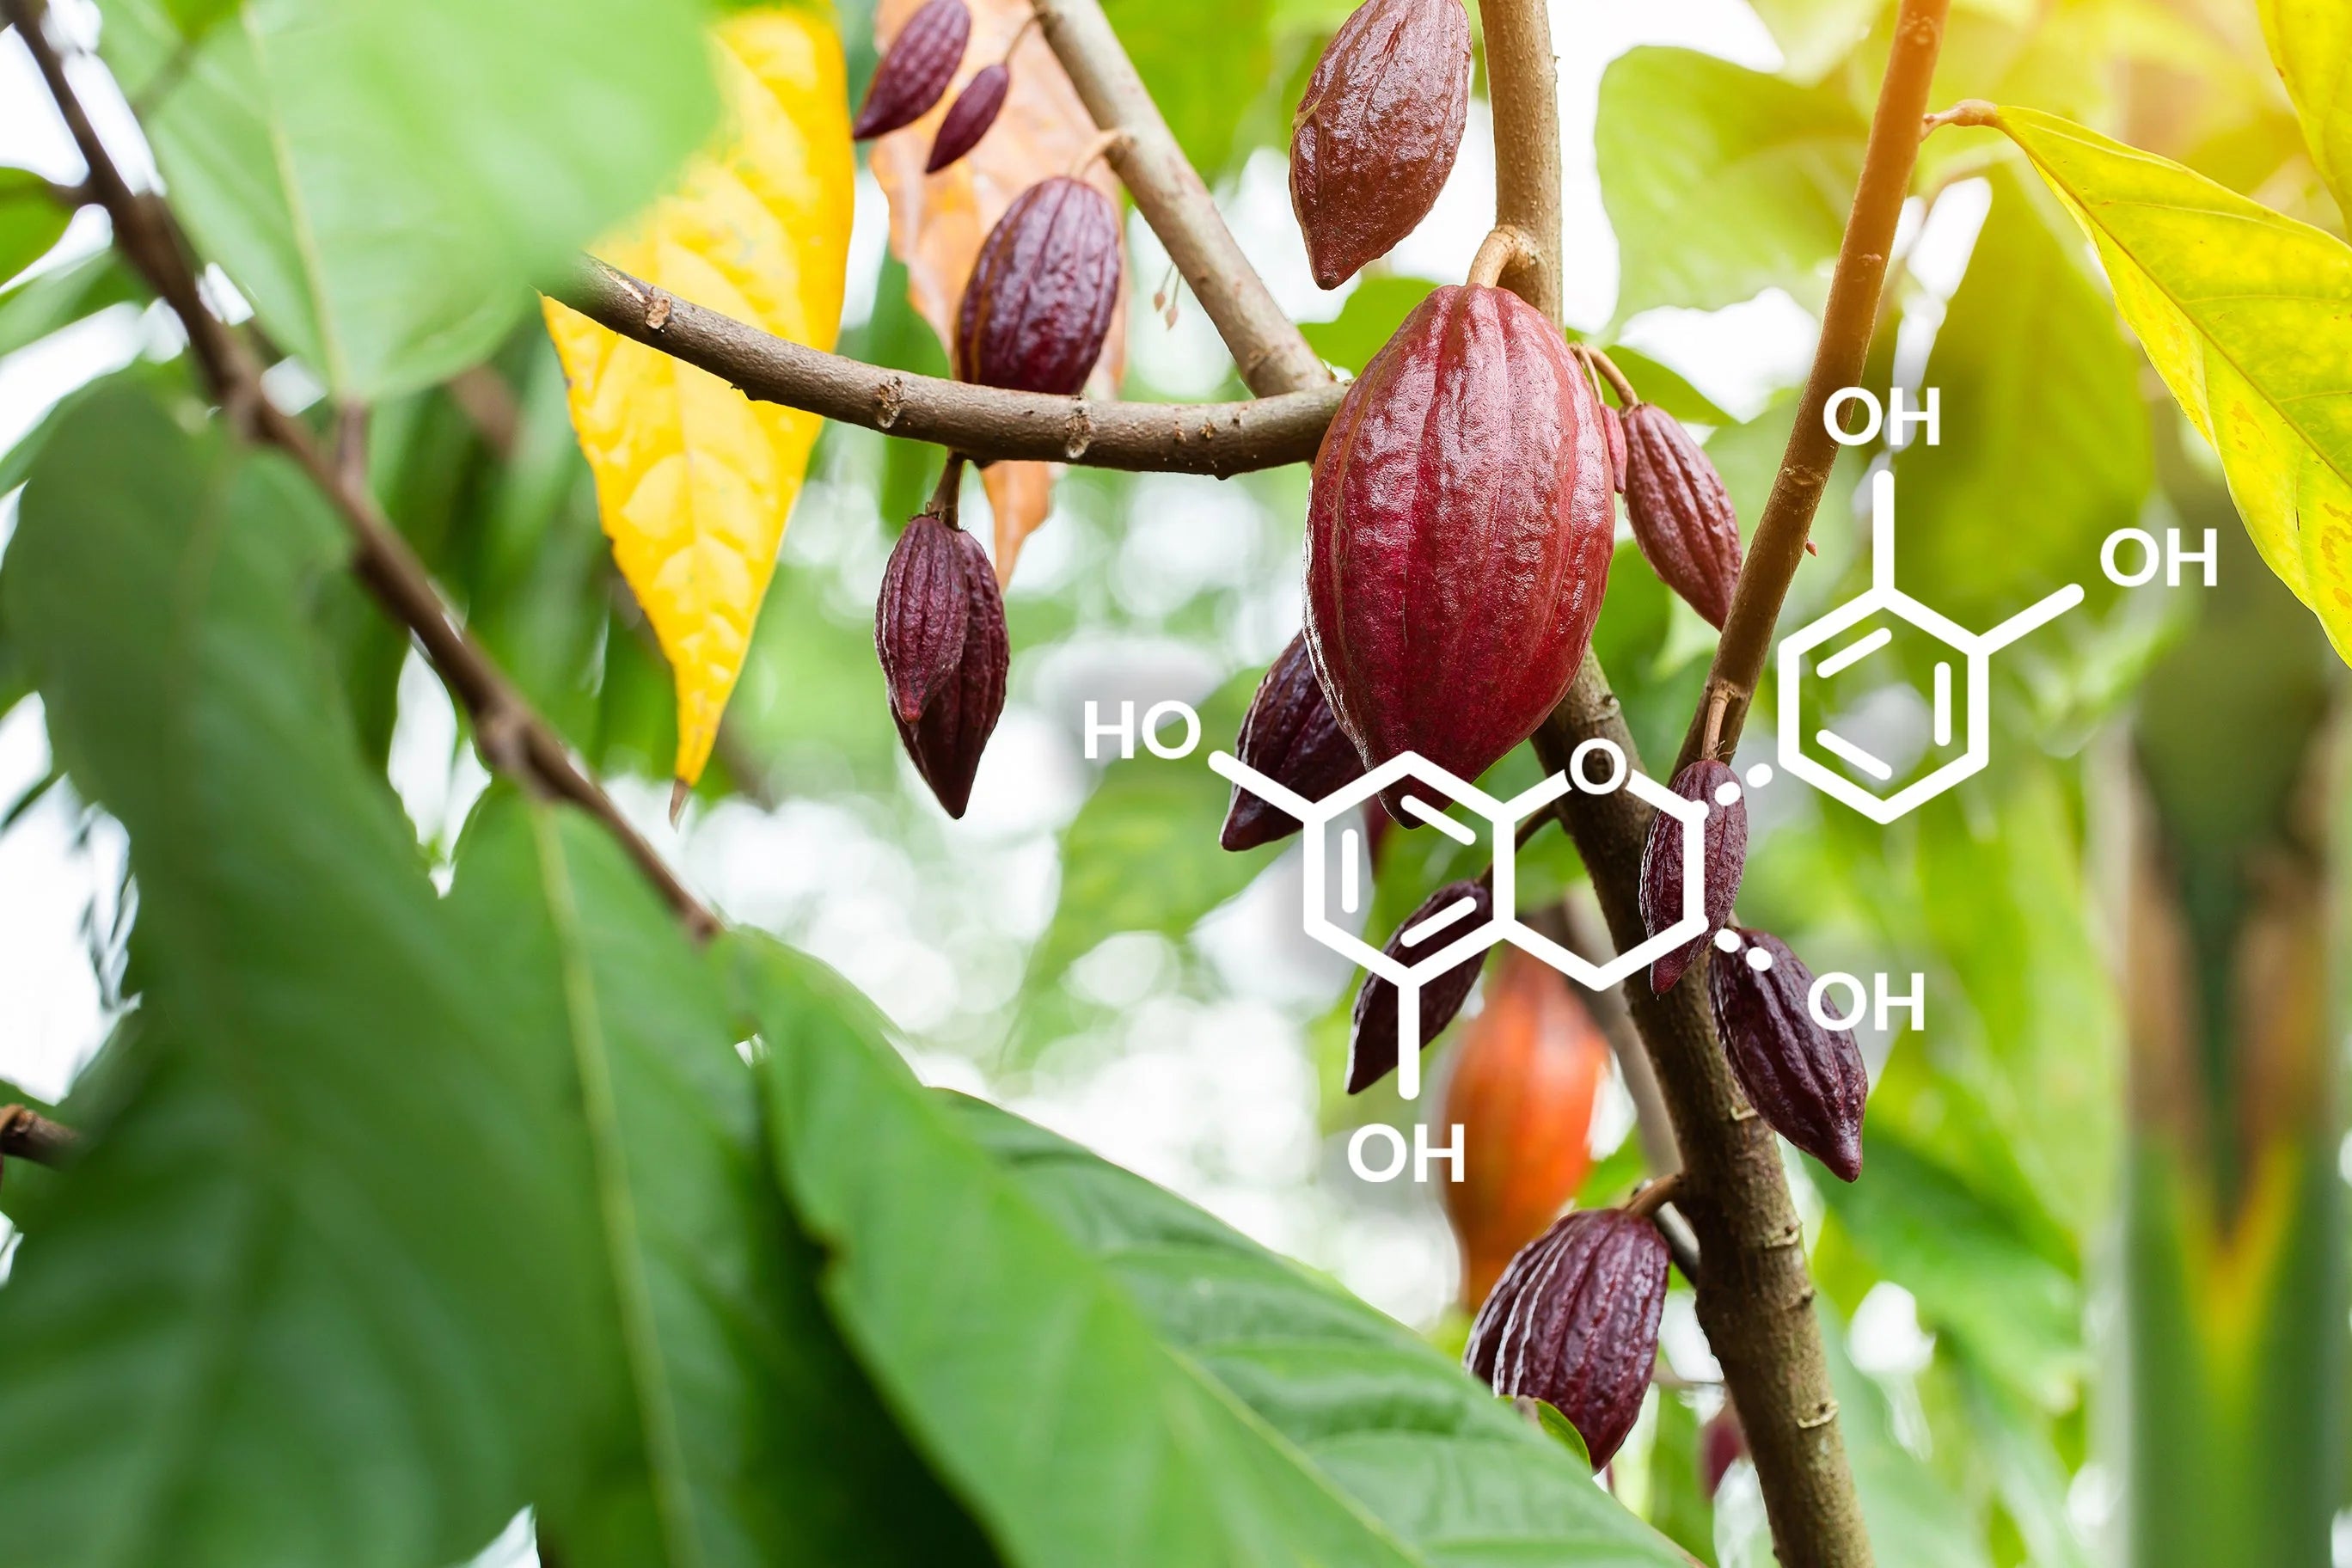 Cocoa pods hanging on a branch with a chemical structure overlaid